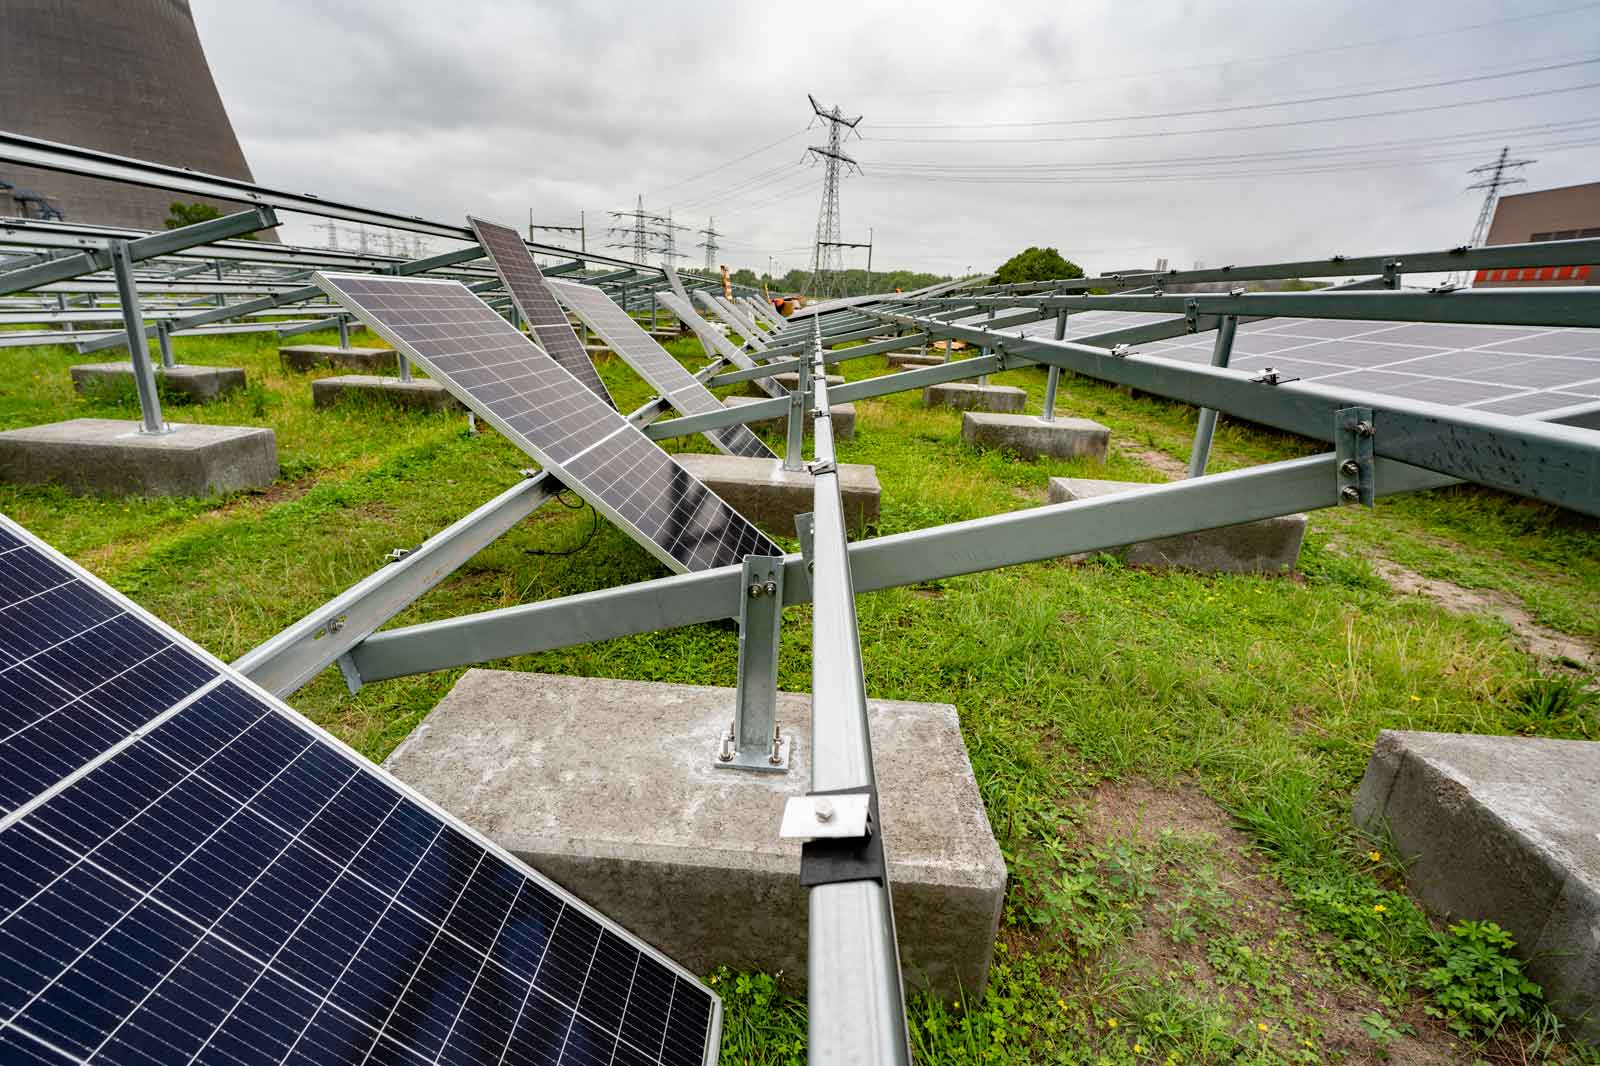 Completed panels of a solar installation | Discover renewables at RWE